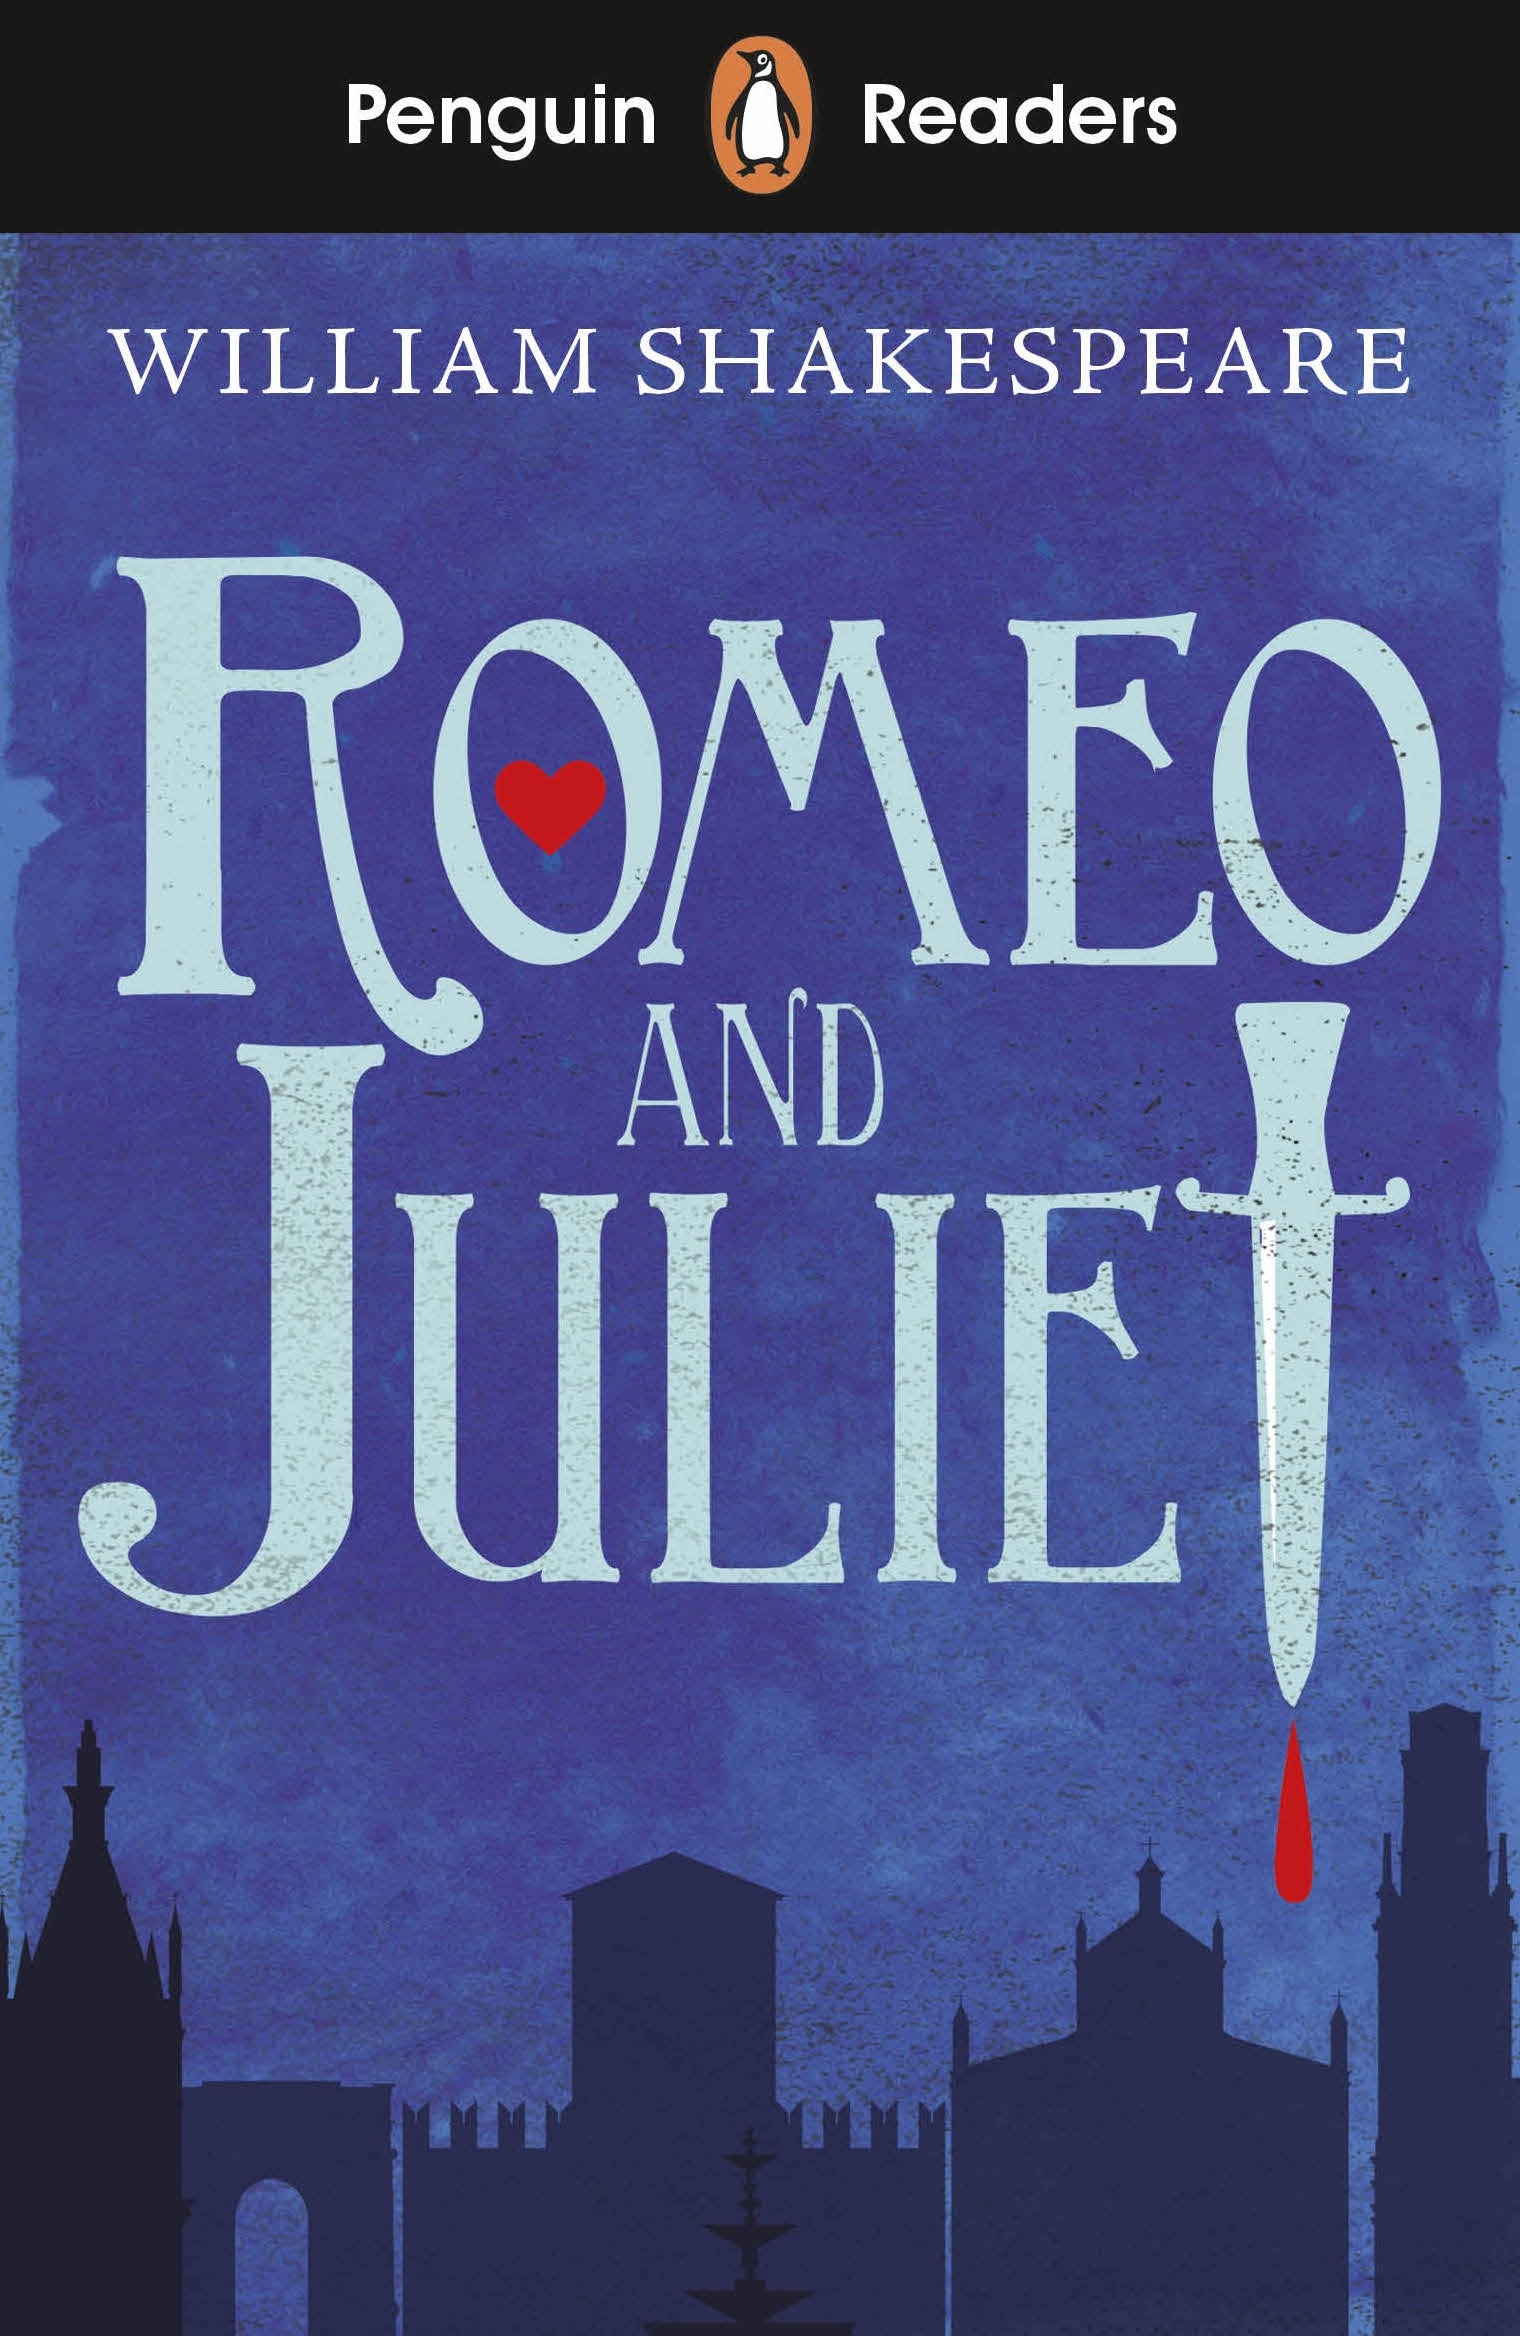 Book “Penguin Readers Starter Level: Romeo and Juliet (ELT Graded Reader)” by William Shakespeare — May 14, 2020